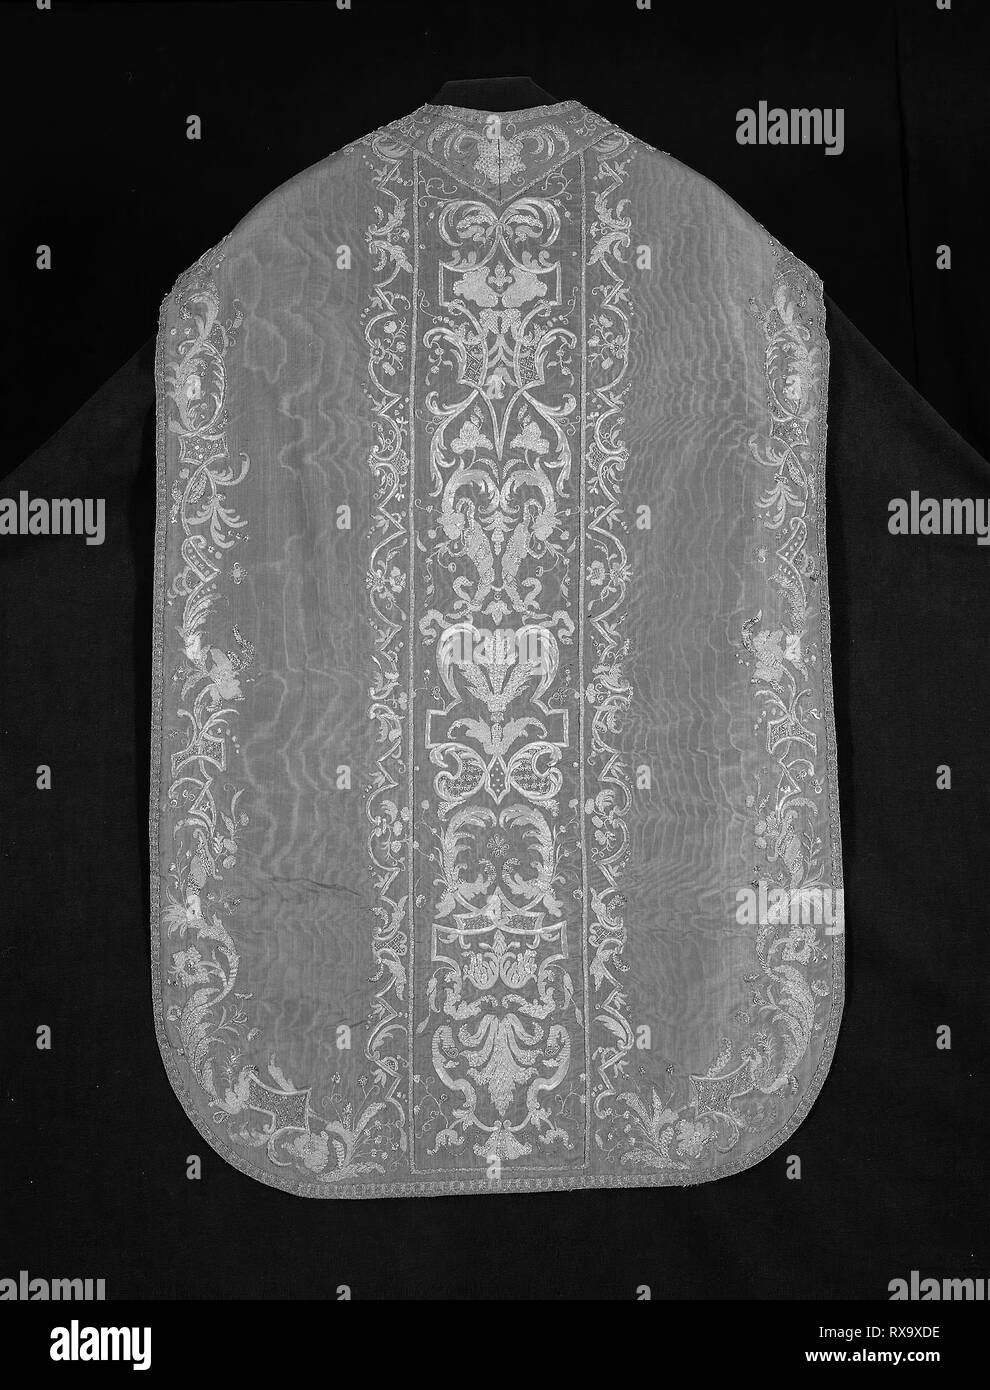 Chasuble, Stole, and Maniple. France or Italy. Date: 1675-1725. Dimensions: a: 112 × 75 cm (44 1/8 × 29 1/2 in.)  b: 209 × 23.2 cm (82 1/4 × 9 1/8 in.)  c: 50.7 × 22.2 cm (20 × 8 3/4 in.). Silk, warp-faced, weft-ribbed plain weave; watered (moiré); underlaid with linen, plain weave; embroidered with gilt-metal strips, spangles, pieces, and wire, and gilt-metal-strip-wrapped silk (file and frisé), in laid work, couching, padded couching, and French knots; edged with gilt-metal-strips and gilt-metal-strip-wrapped silk, bobbin-made tapes. Origin: France. Museum: The Chicago Art Institute. Stock Photo